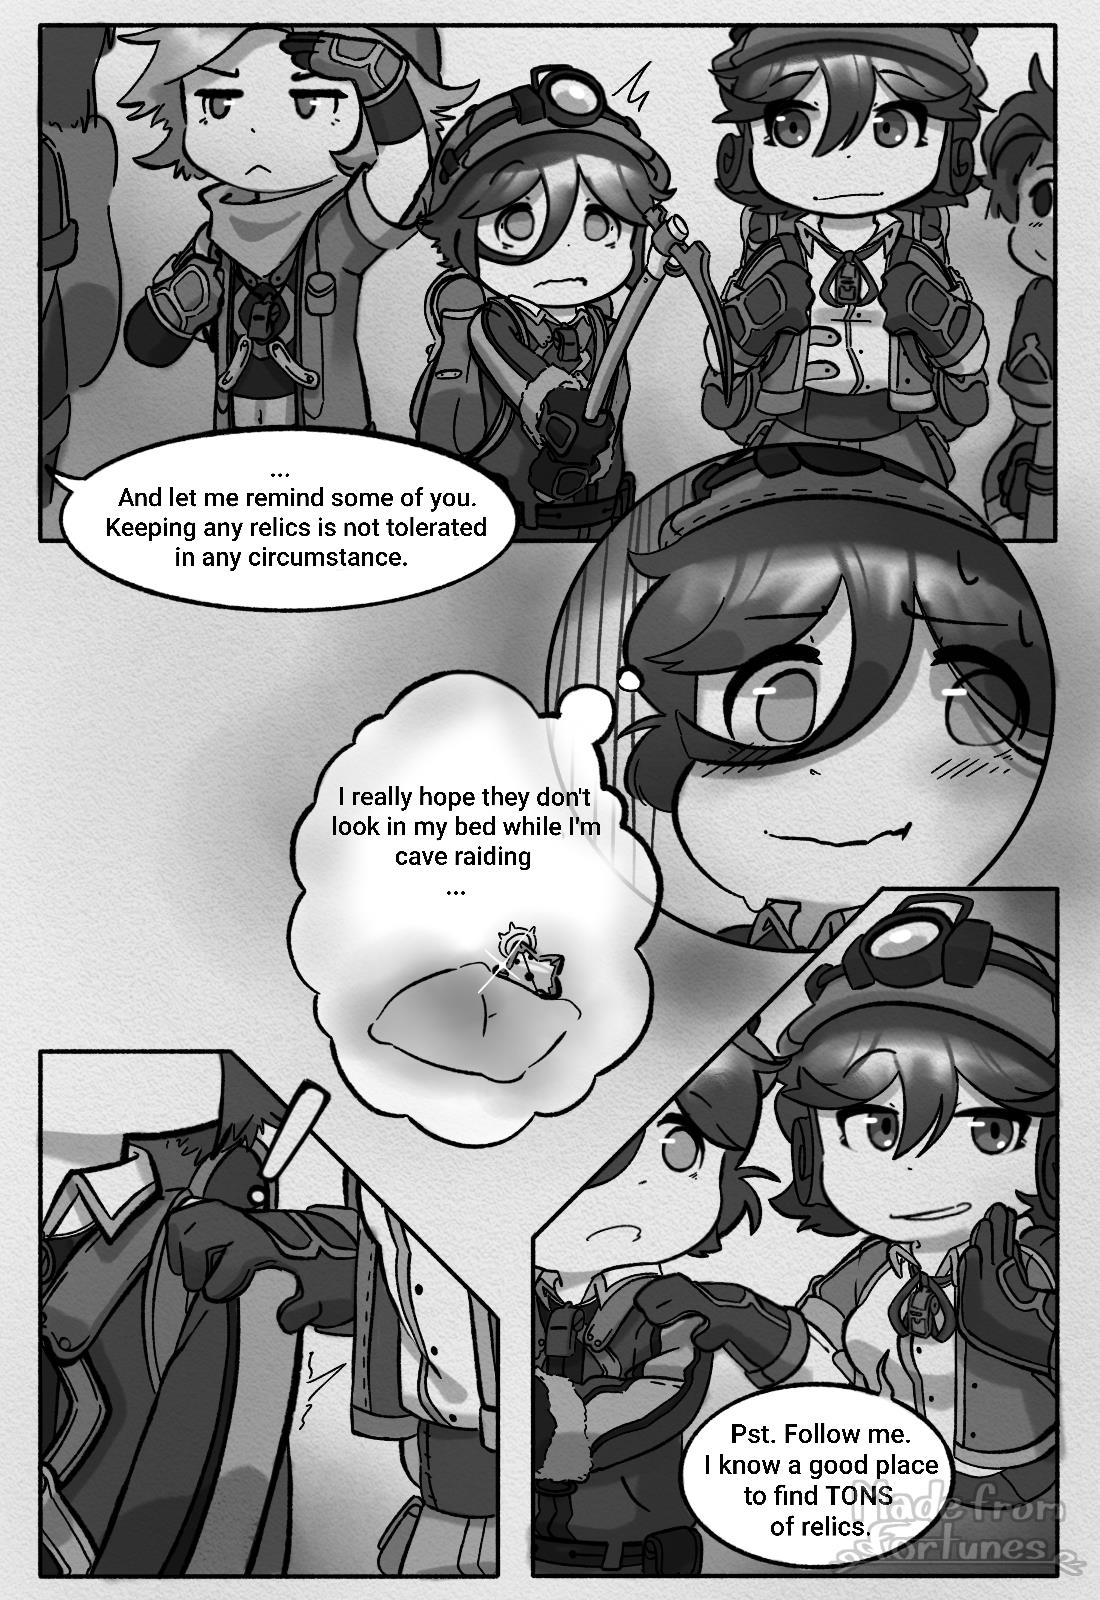 Made From Fortunes (Made In Abyss Fanmade Comic) Vol.1 Chapter 2: Blue Whistle - Picture 2